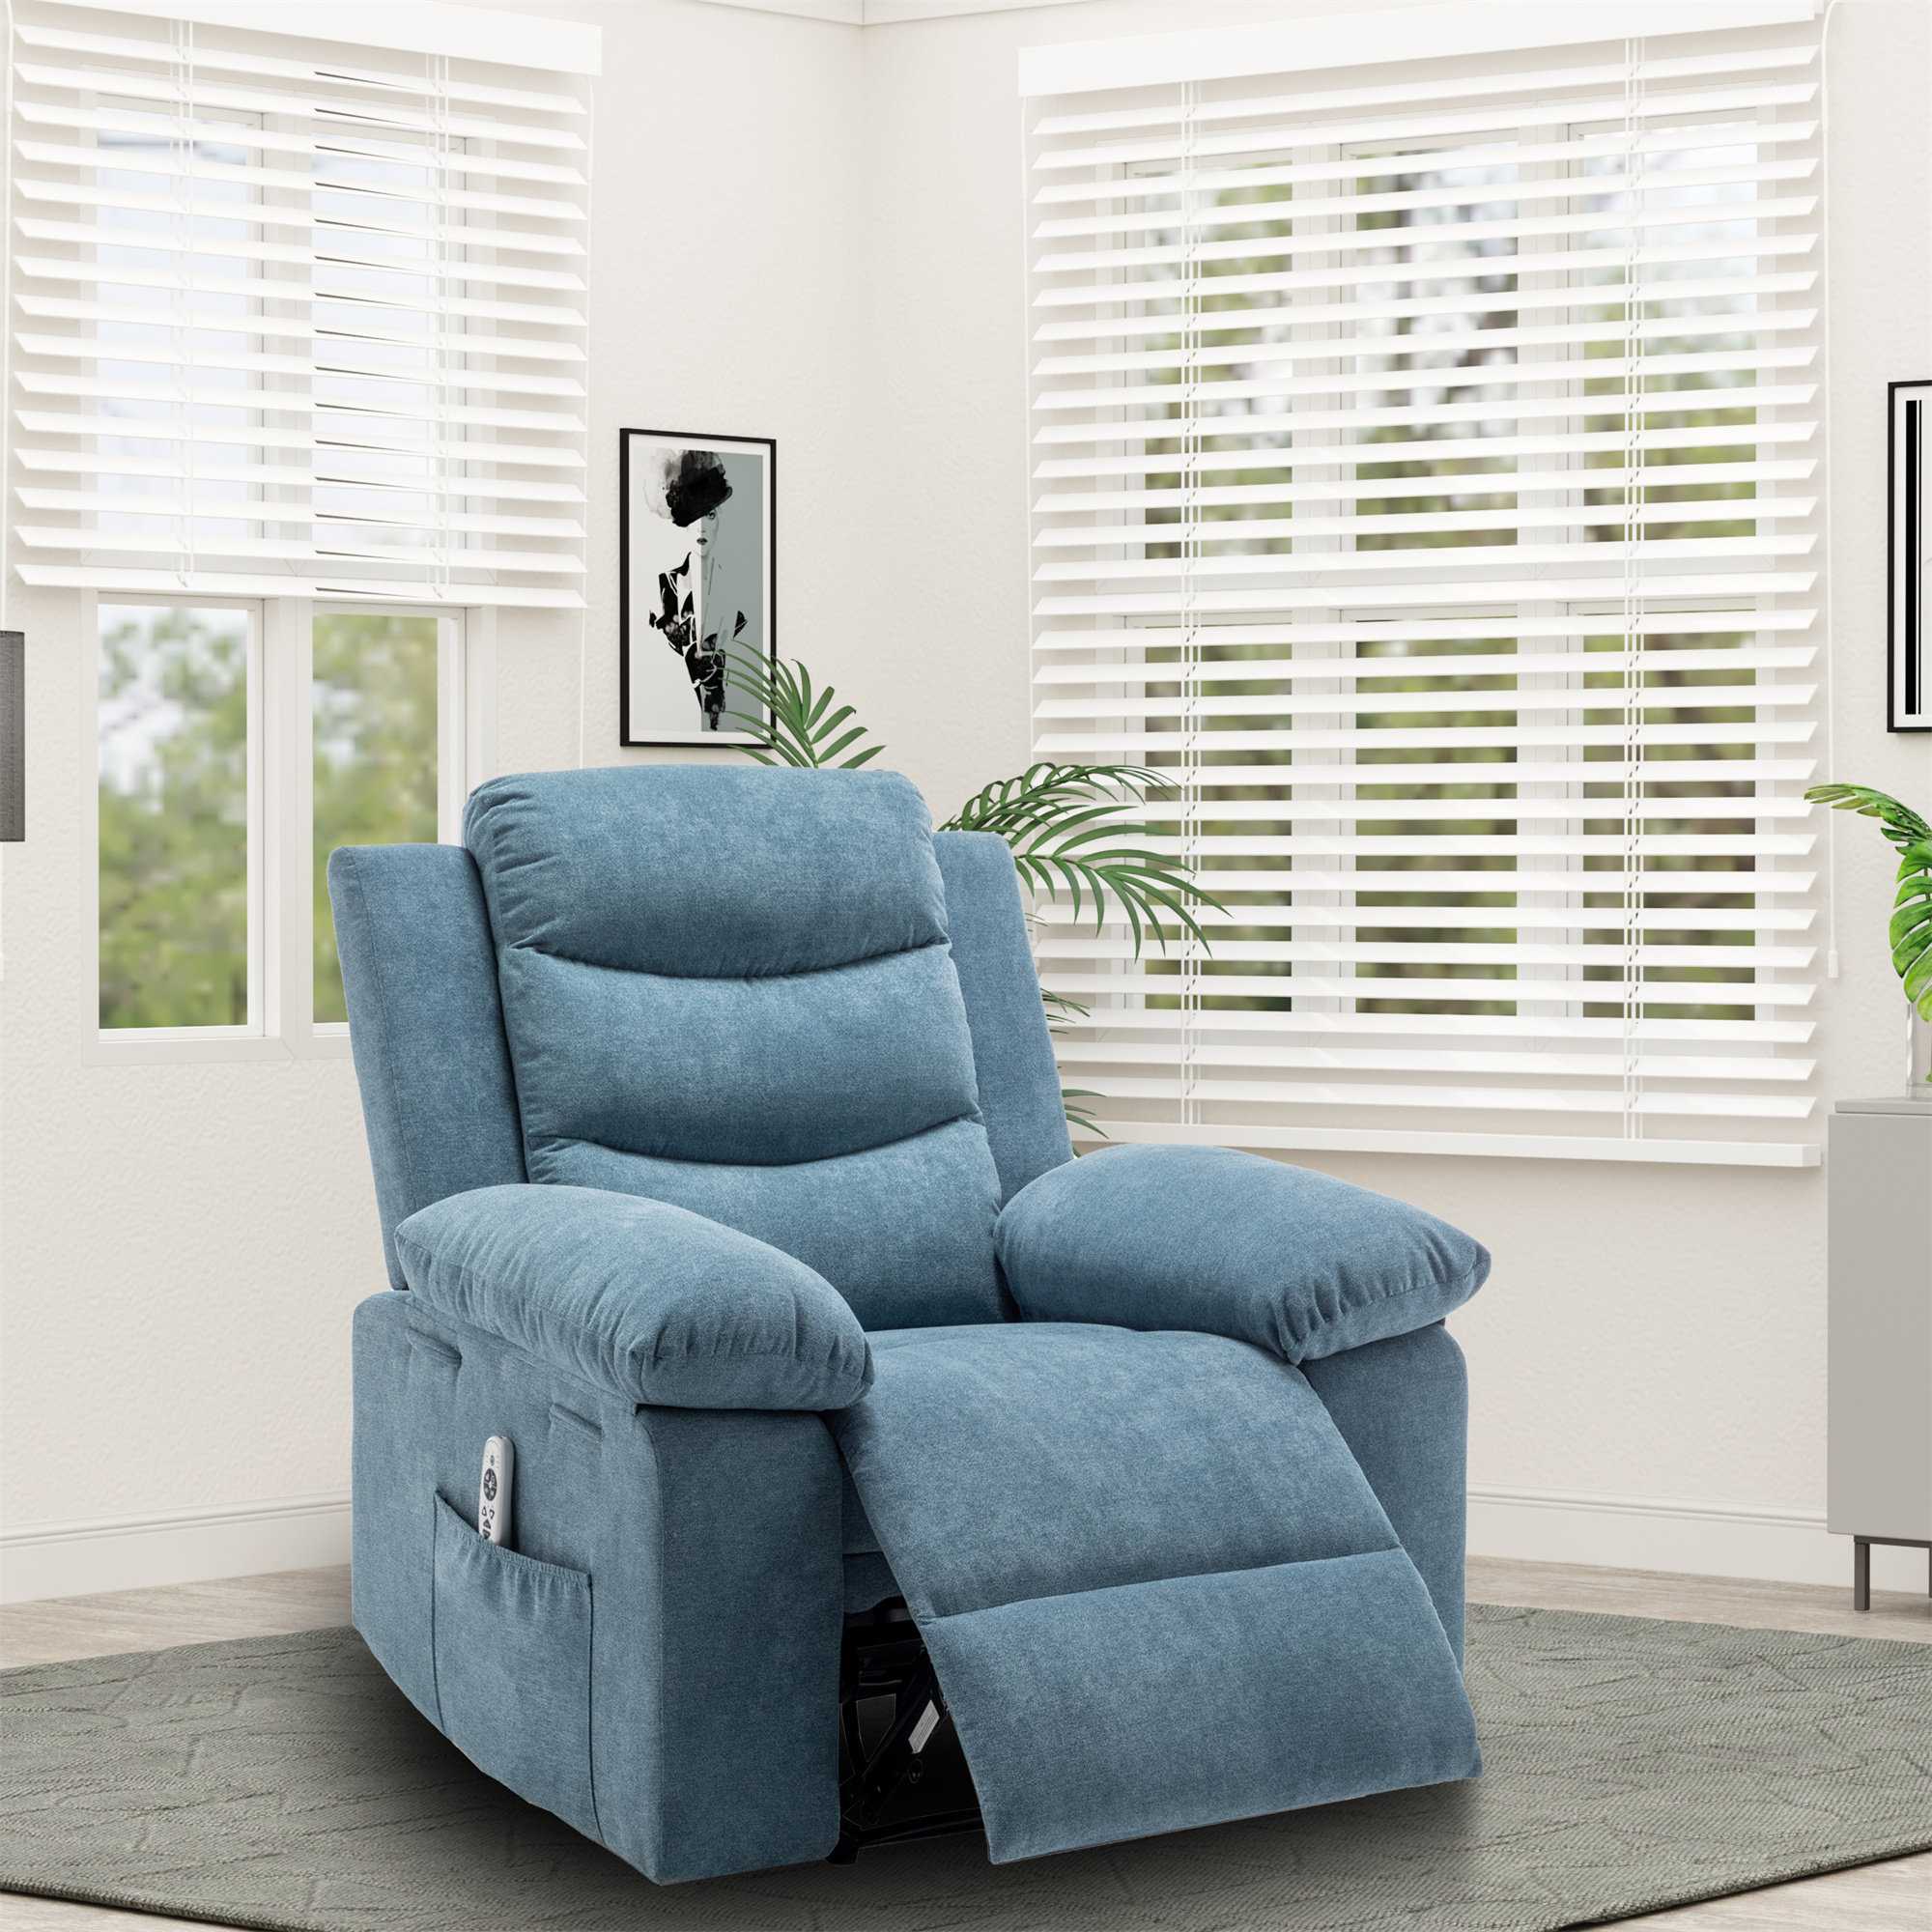 Pantasis Power Recliner Rocking Chair with Adjustable Massage Function